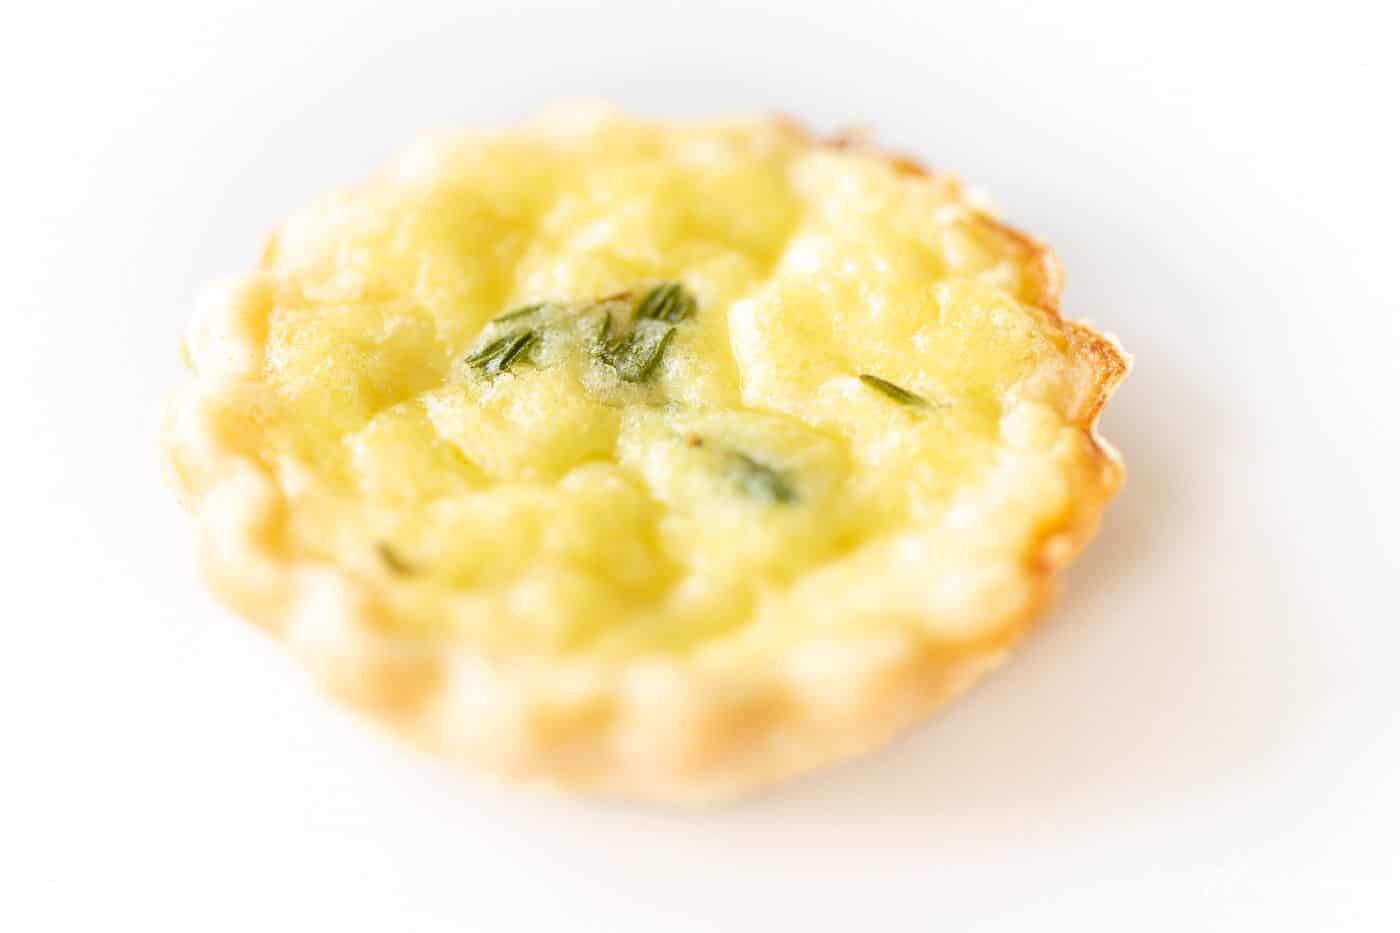 A small cheddar cheese tart topped with fresh herbs on a marble surface.